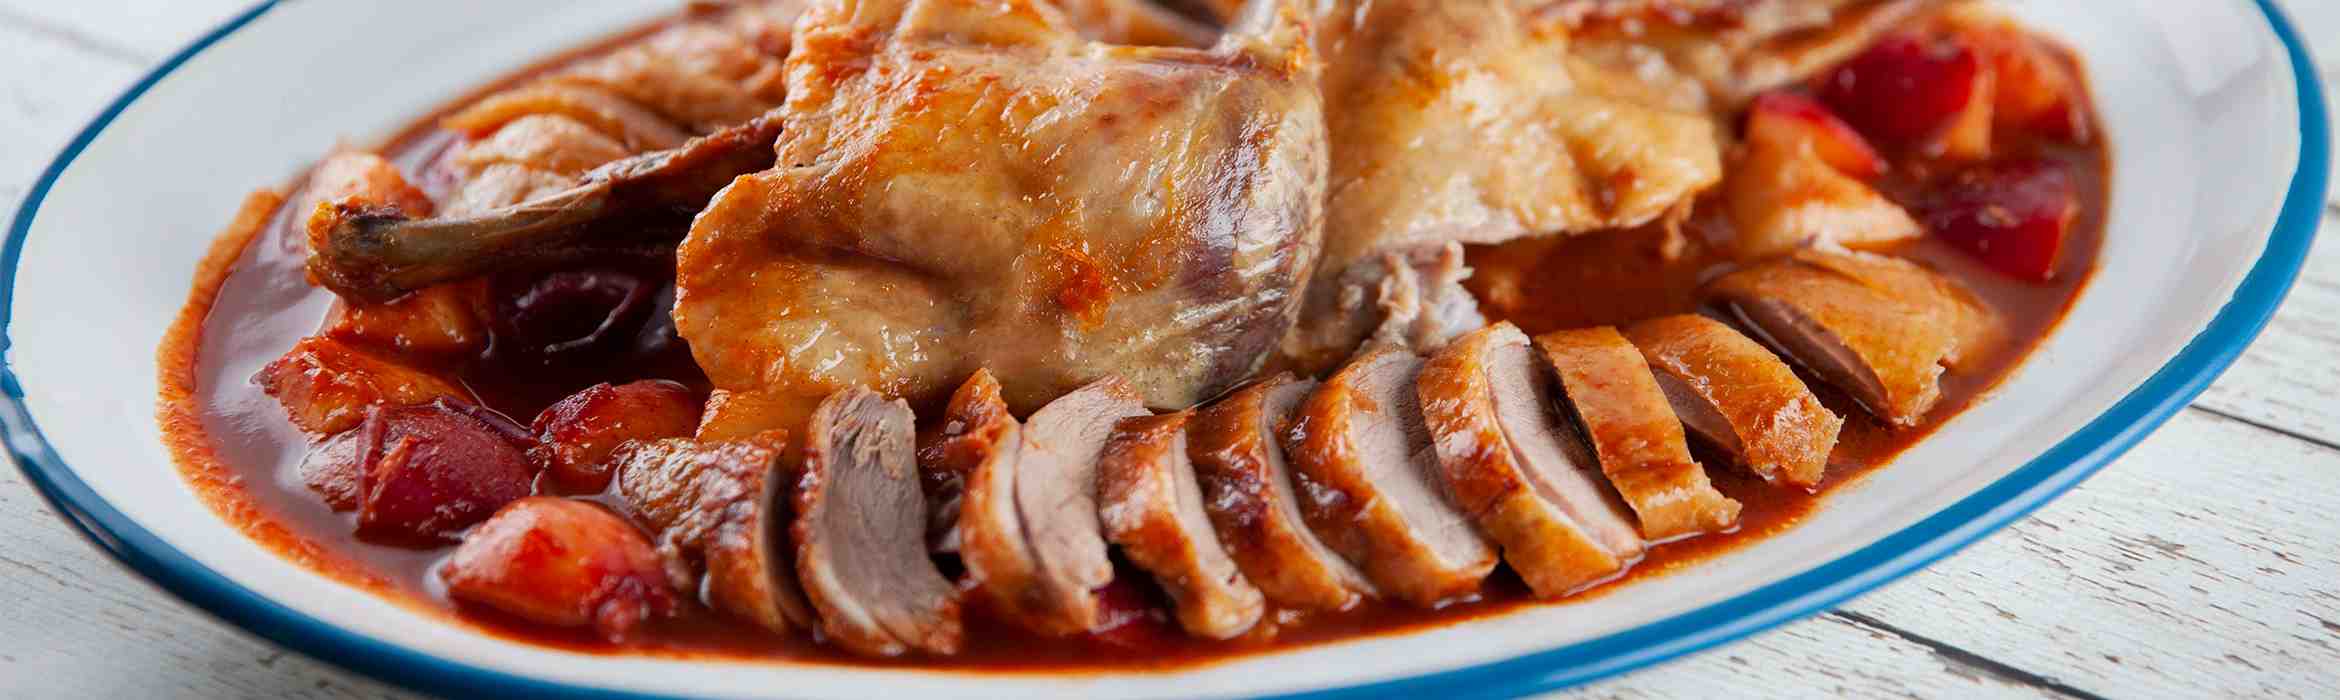 Roasted Duck with Sweet & Sour Sauce Recipe